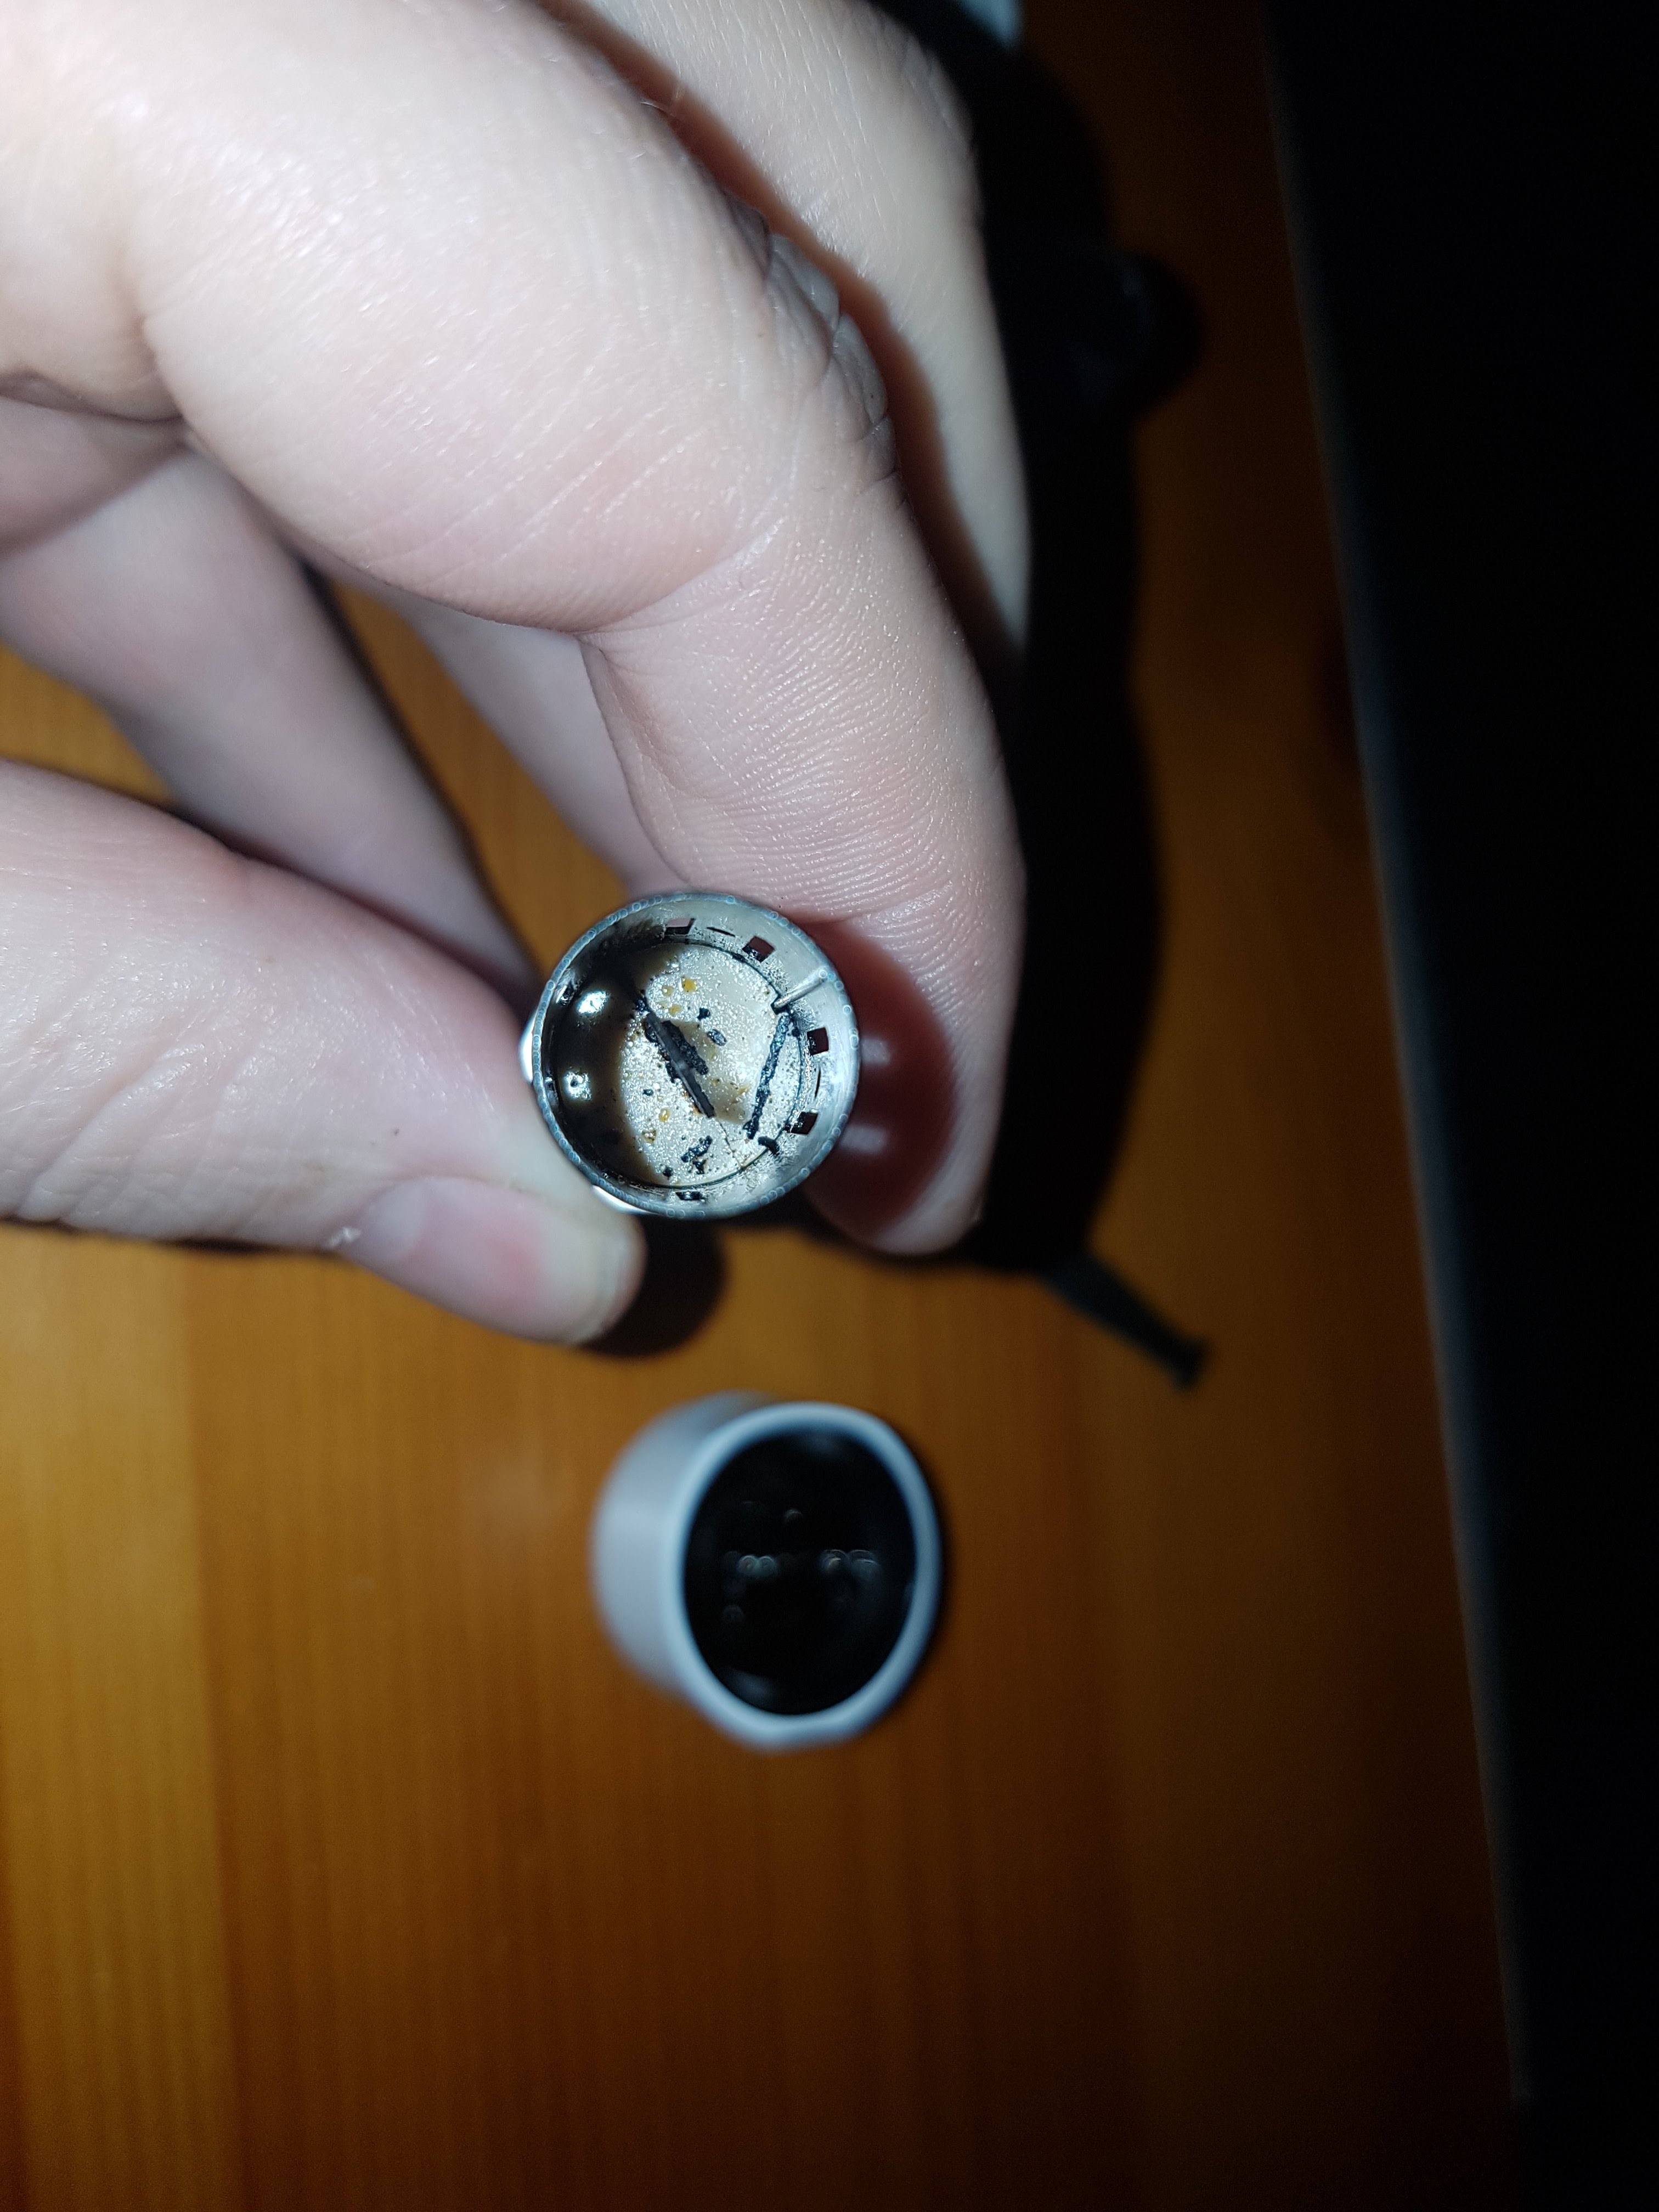 Picture of the inside of the IQOS holder showing charred debris